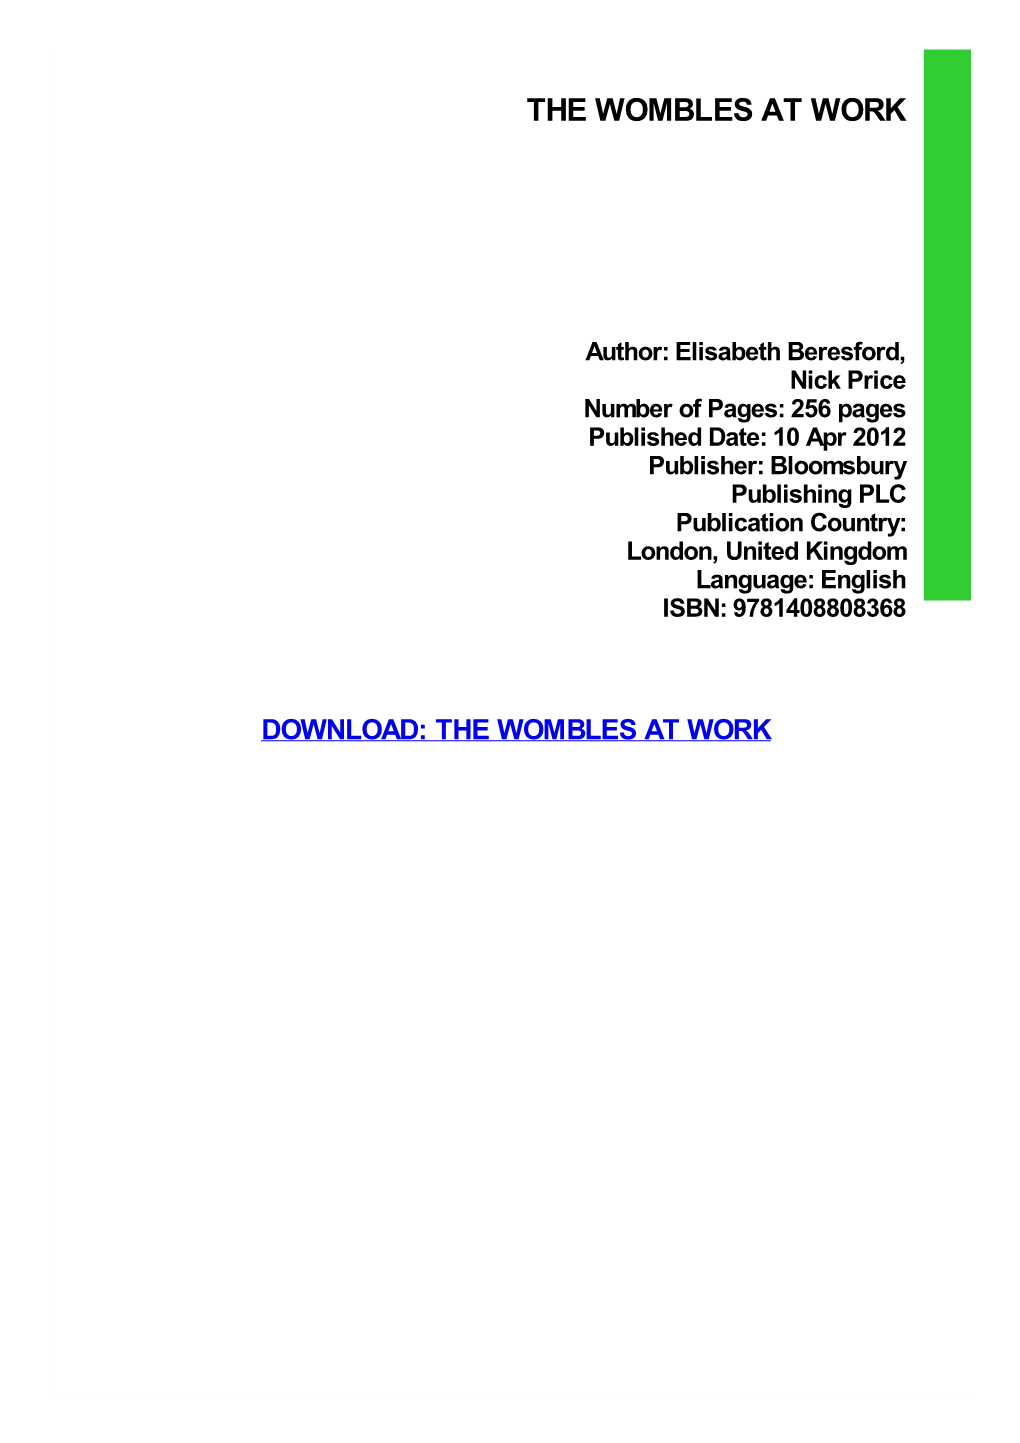 Read Book the Wombles at Work Ebook Free Download